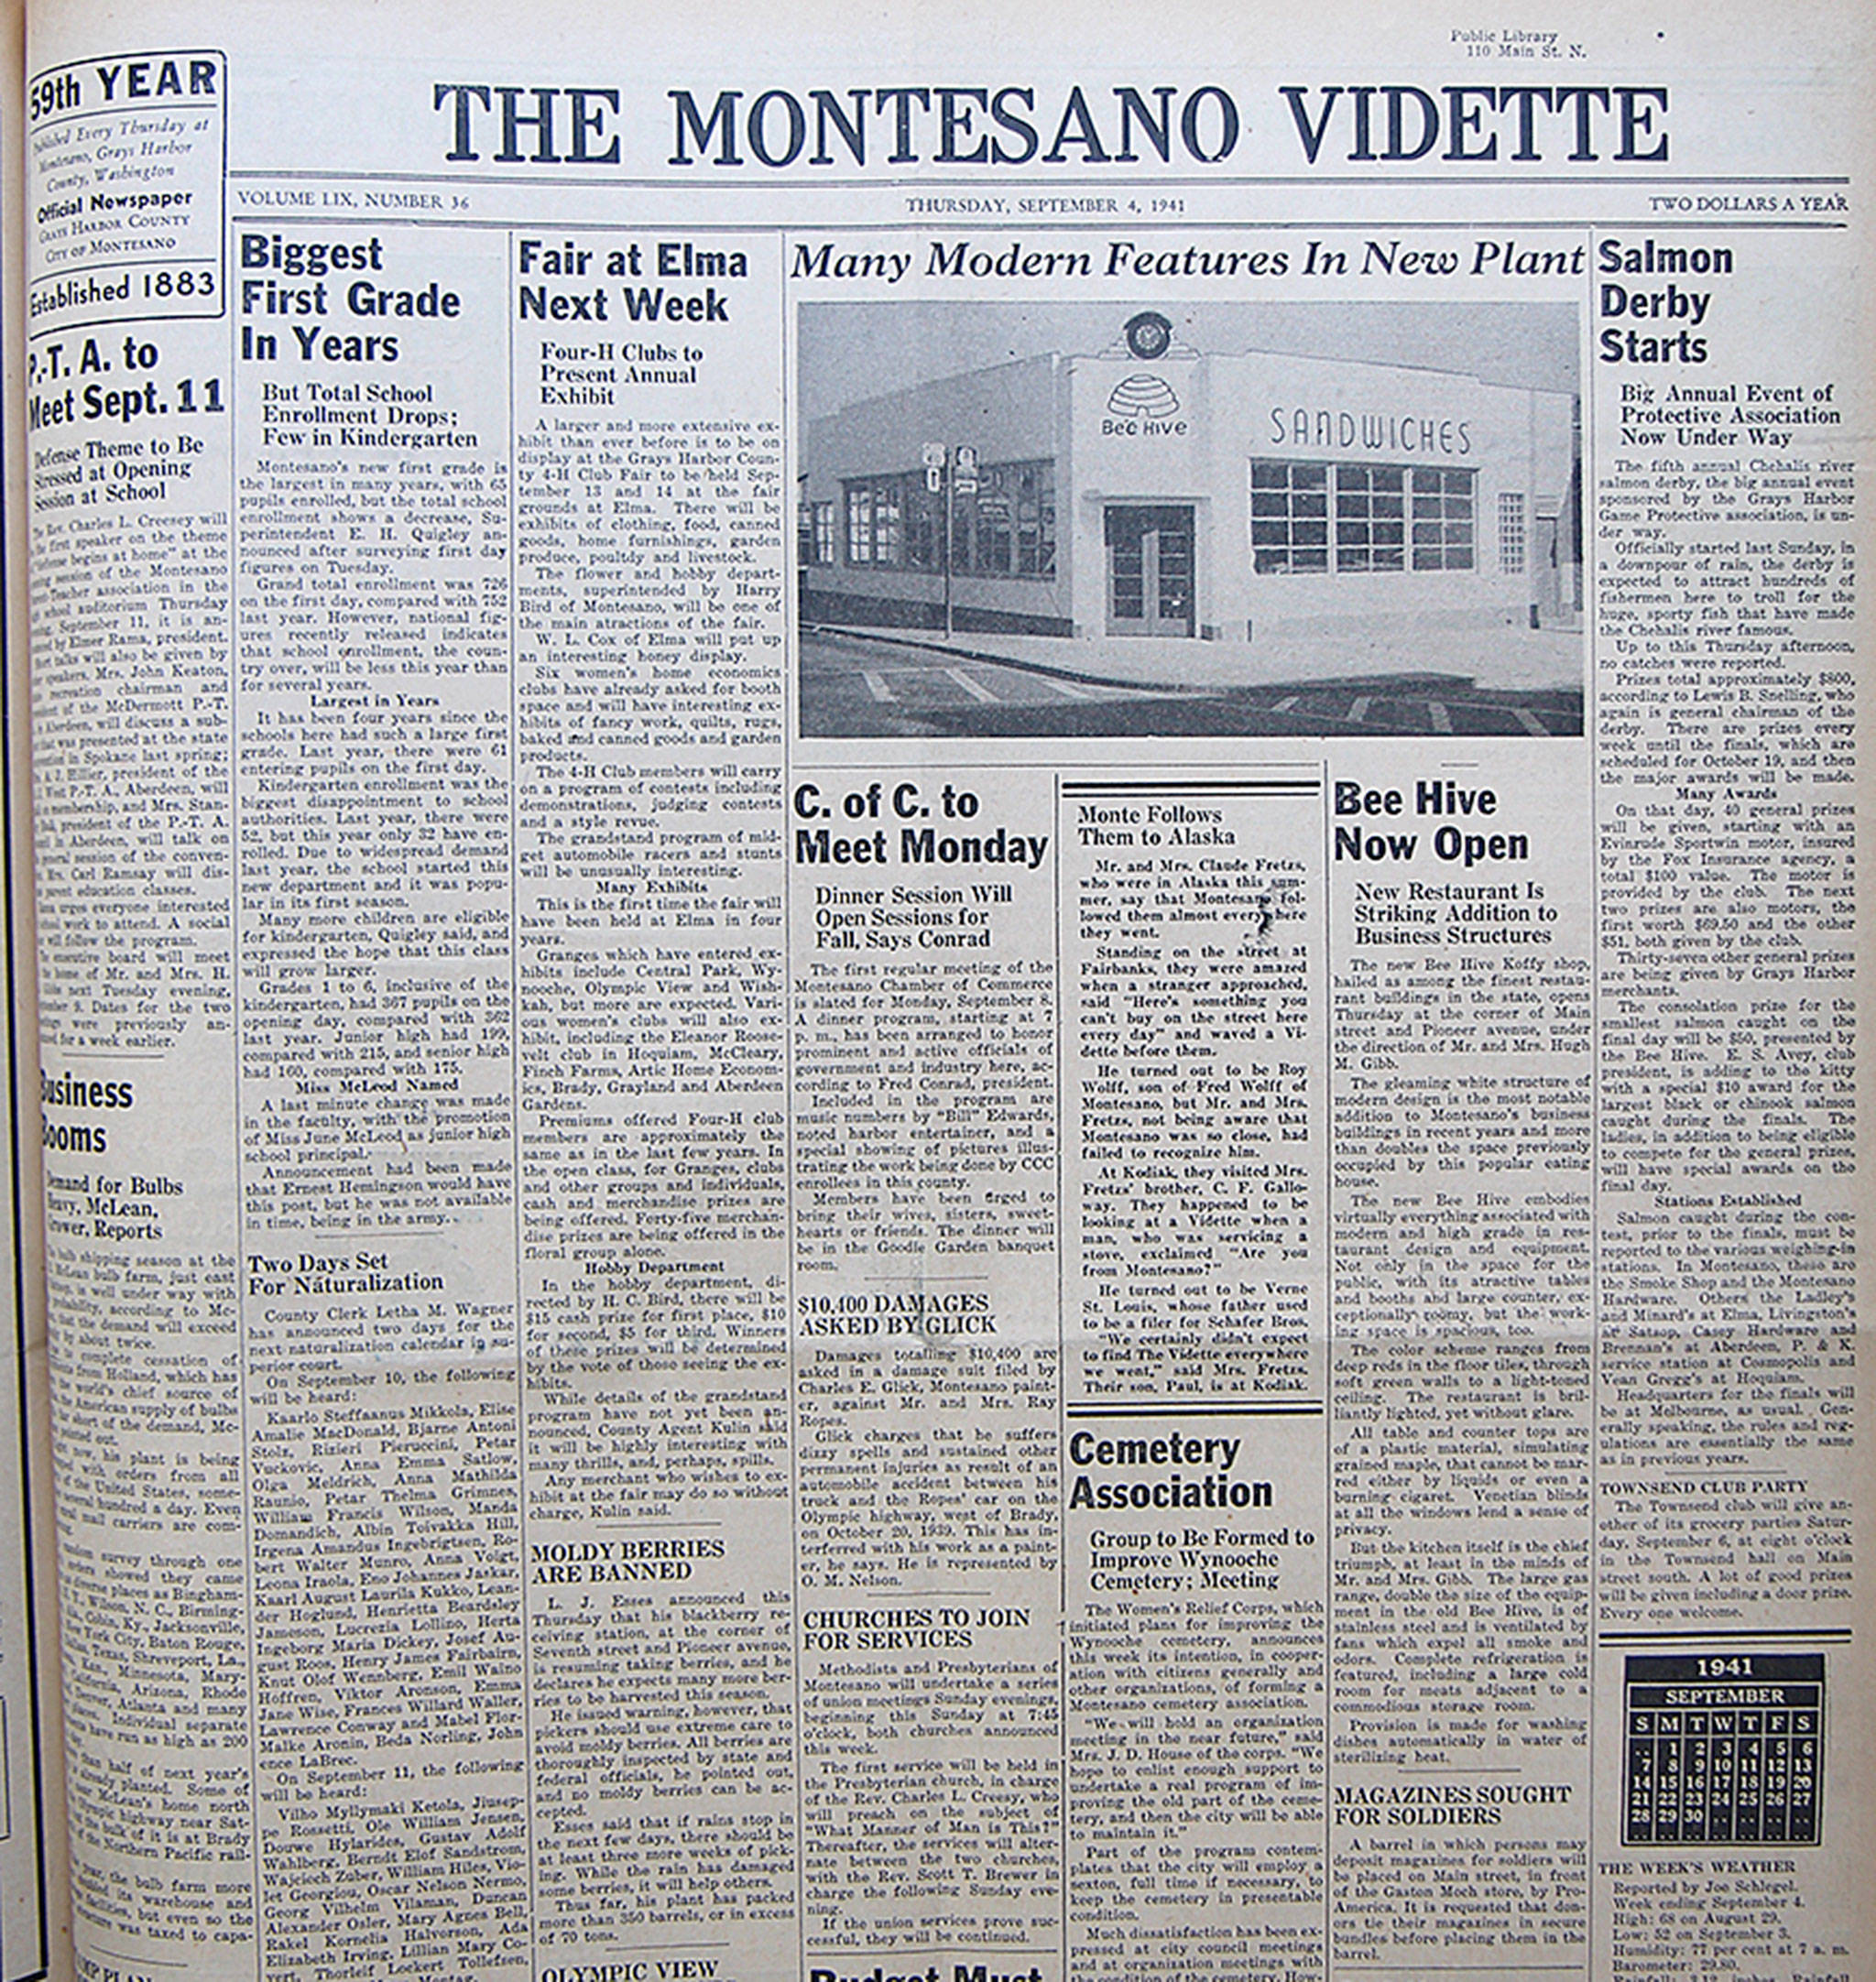 The Sept. 4, 1941, edition of The Vidette has a picture of the new Bee Hive Koffy shop, which opened that week in the new building. It’s the same location The Bee Hive Restaurant is today, 300 S. Main St in Montesano.